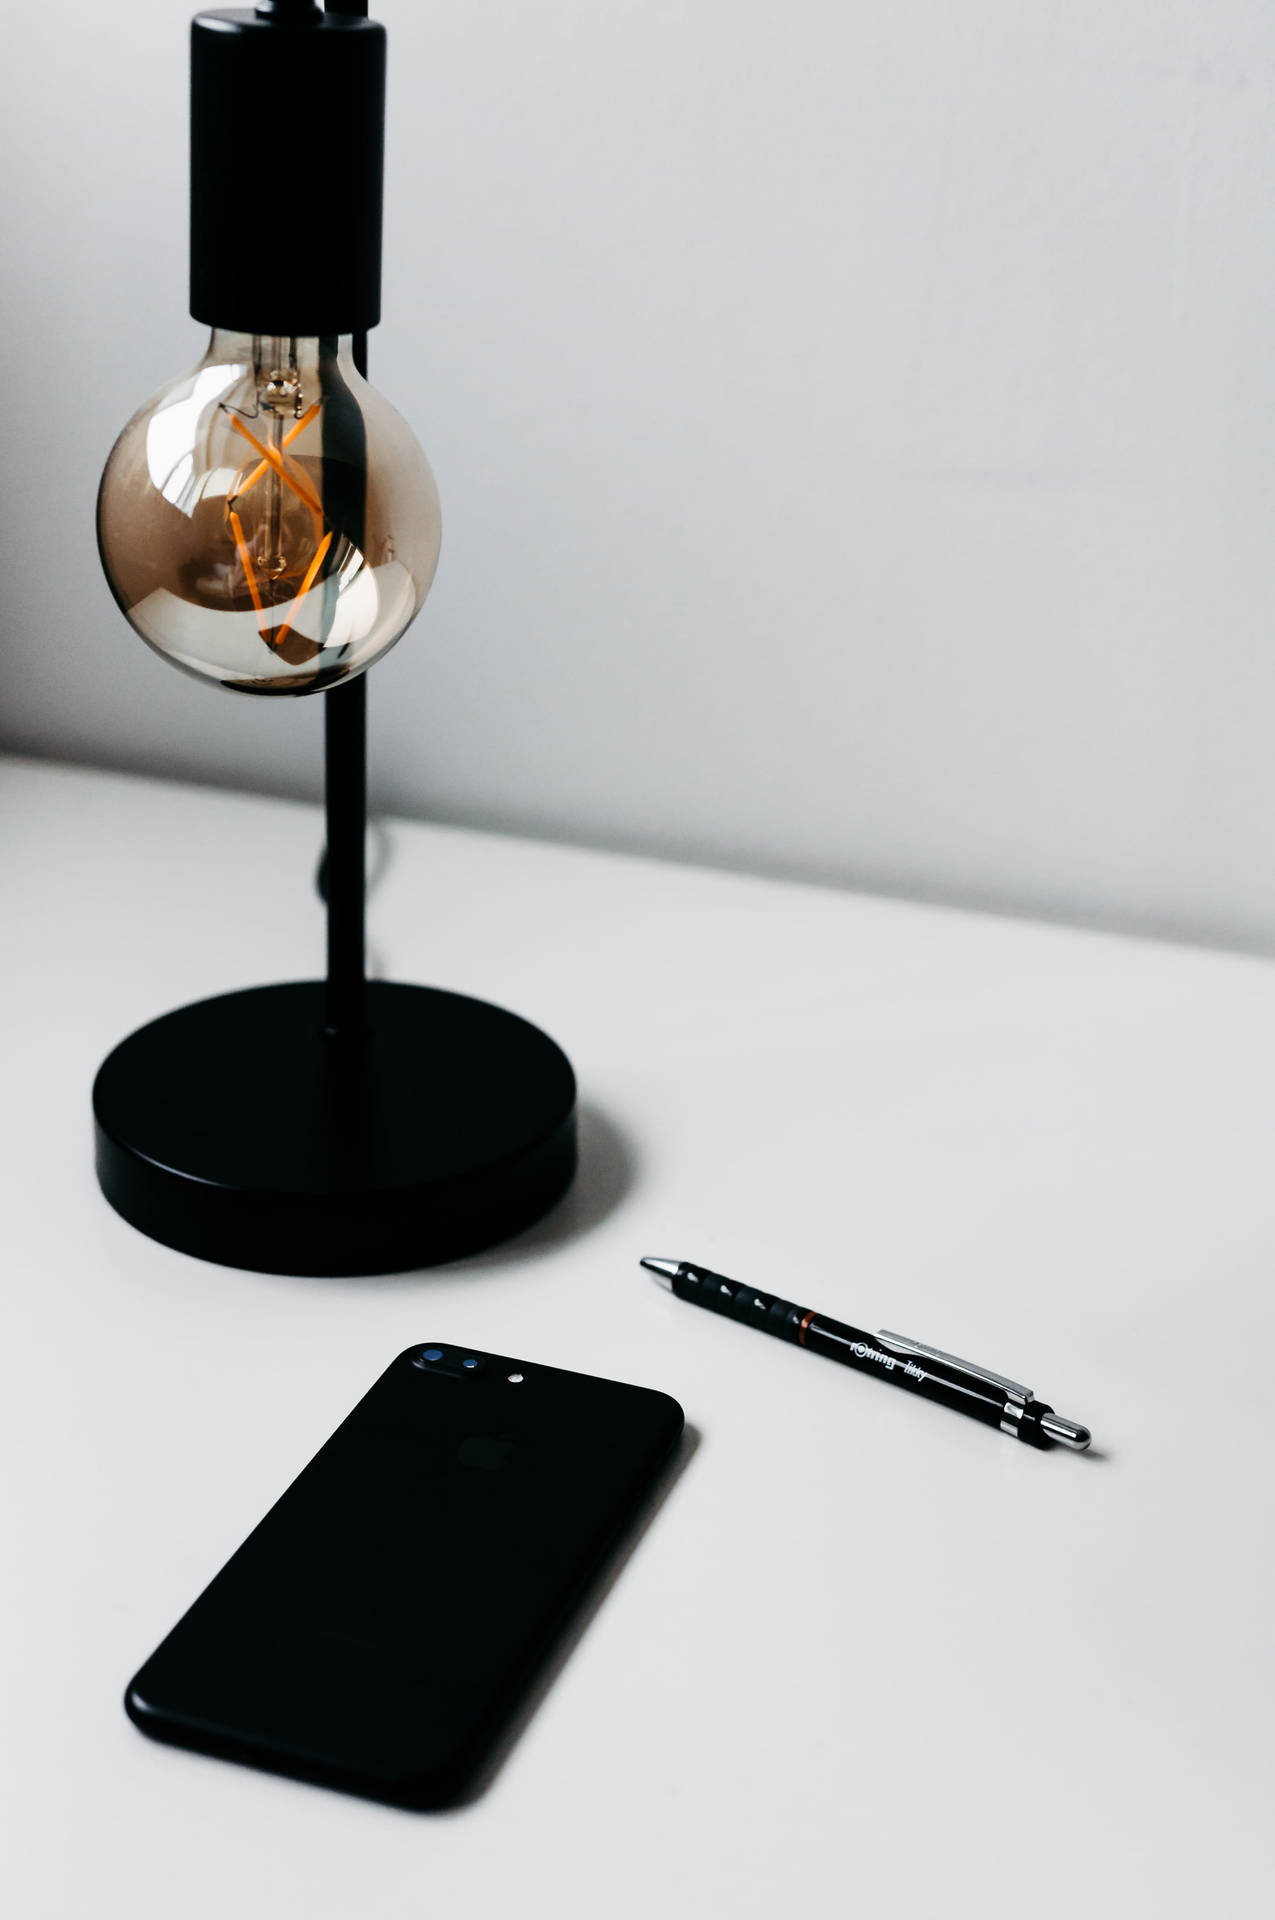 Iphone Desk With Lamp Wallpaper